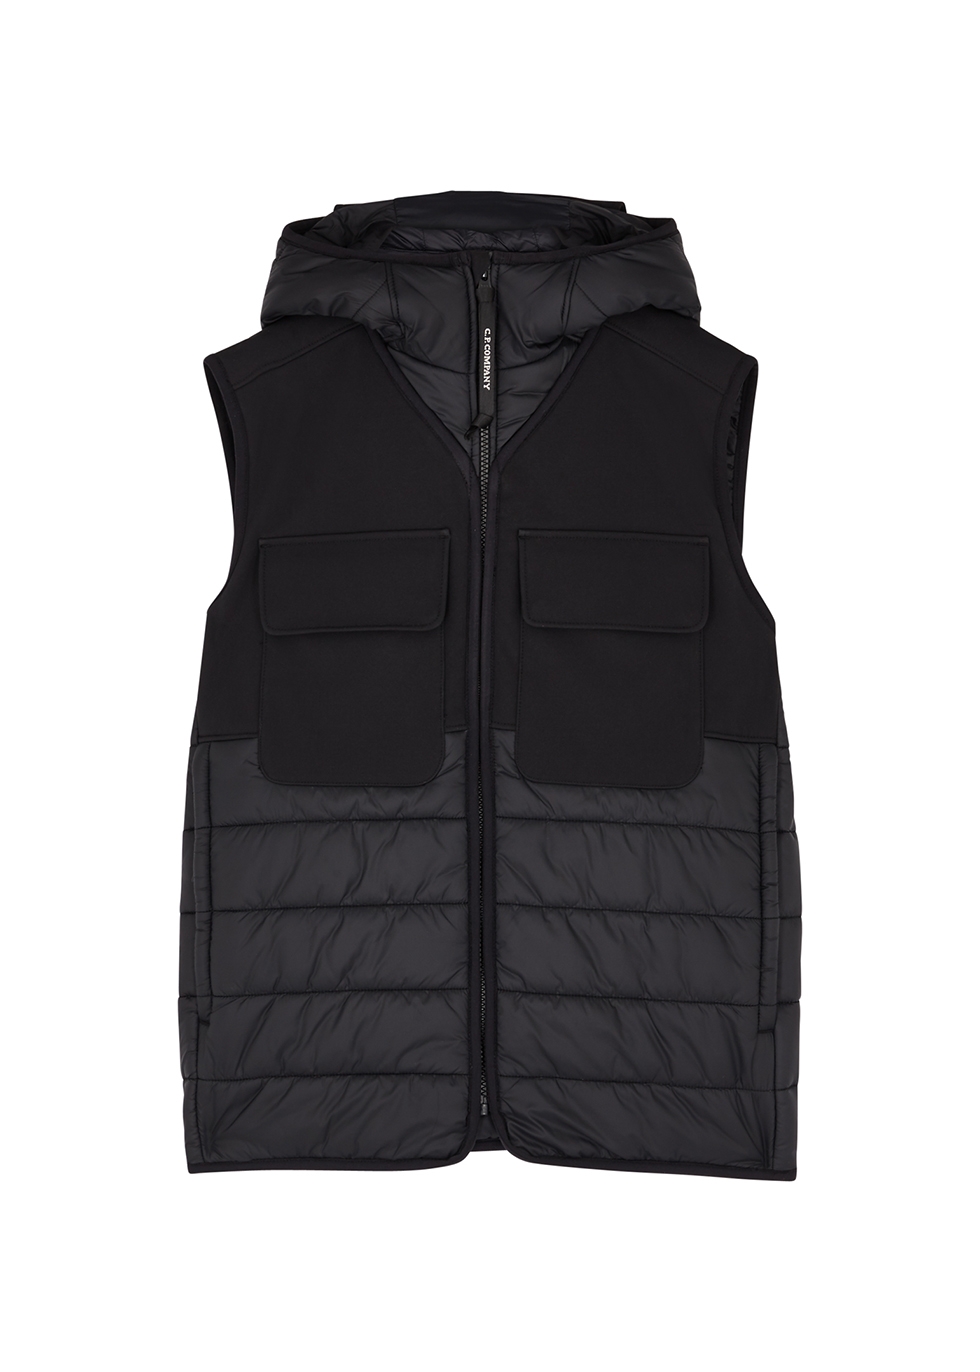 KIDS Black quilted shell gilet 14 years Harvey Nichols Clothing Jackets Gilets 